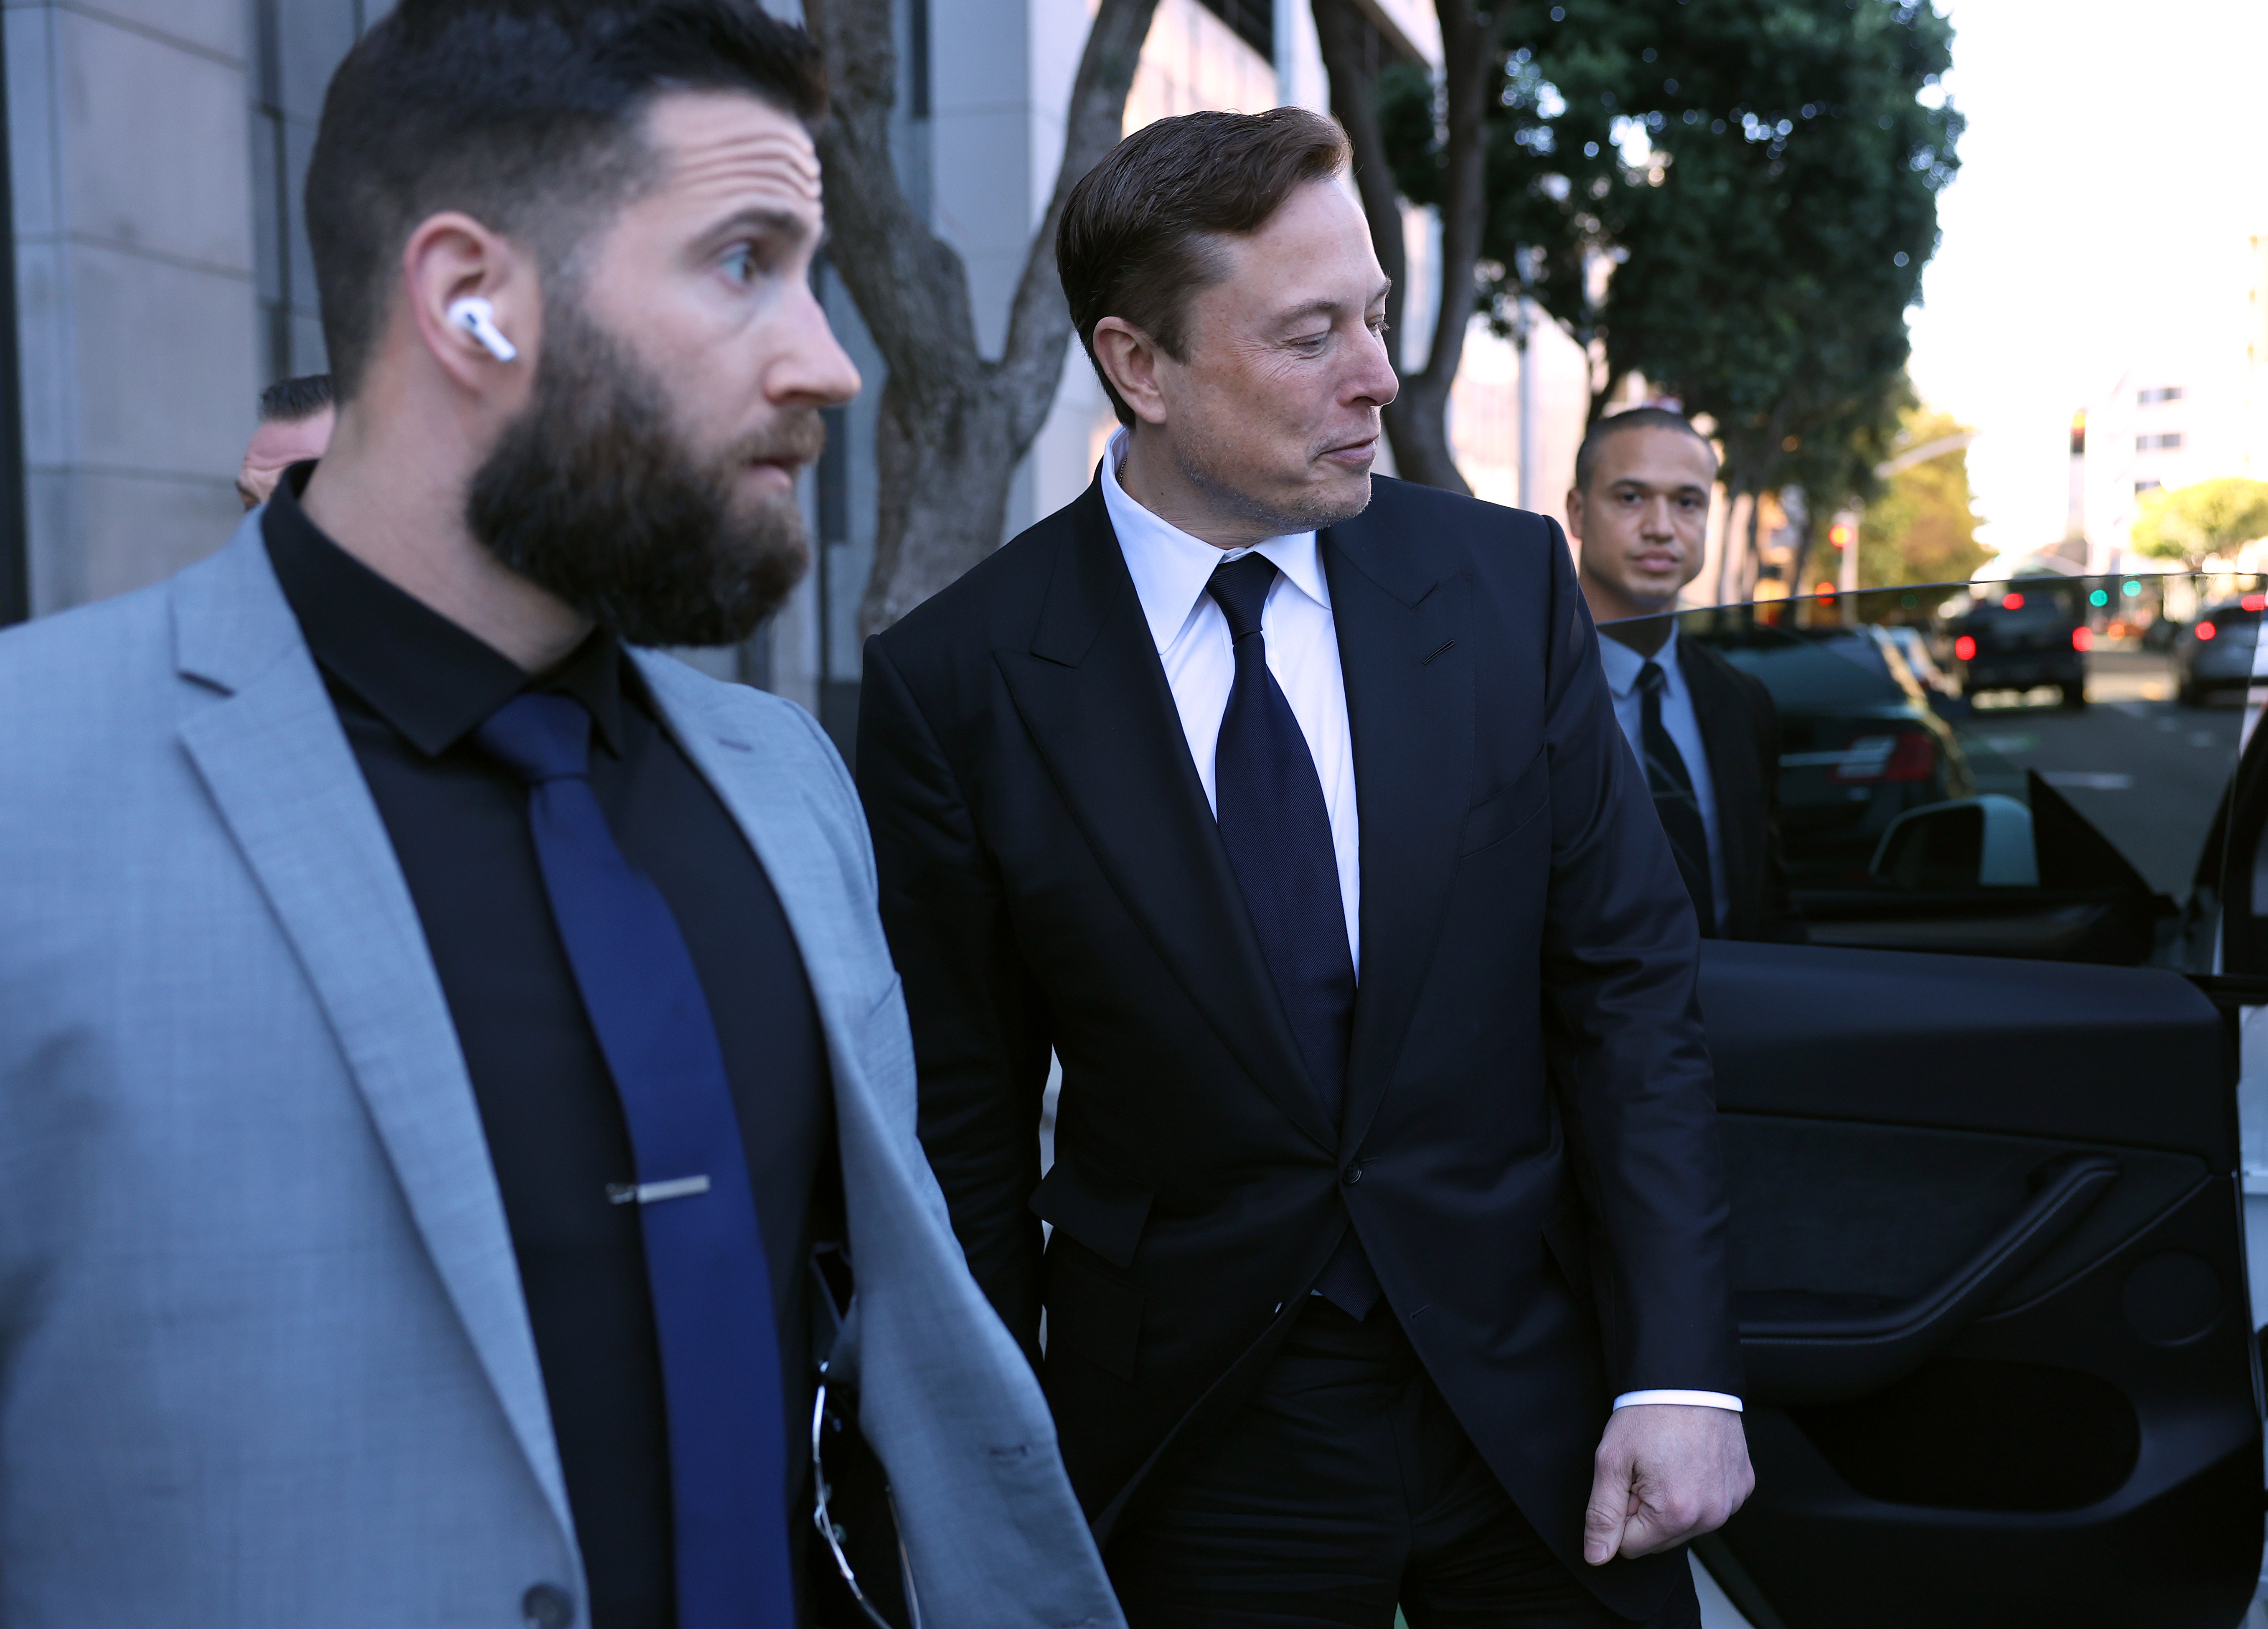 SAN FRANCISCO, CALIFORNIA - JANUARY 24: Tesla CEO Elon Musk leaves the Phillip Burton Federal Building on January 24, 2023 in San Francisco, California. Musk testified at a trial regarding a lawsuit that has investors suing Tesla and Musk over his August 2018 tweets saying he was taking Tesla private with funding that he had secured. The tweet was found to be false and cost shareholders billions of dollars when Tesla's stock price began to fluctuate wildly allegedly based on the tweet. (Photo by Justin Sullivan/Getty Images)